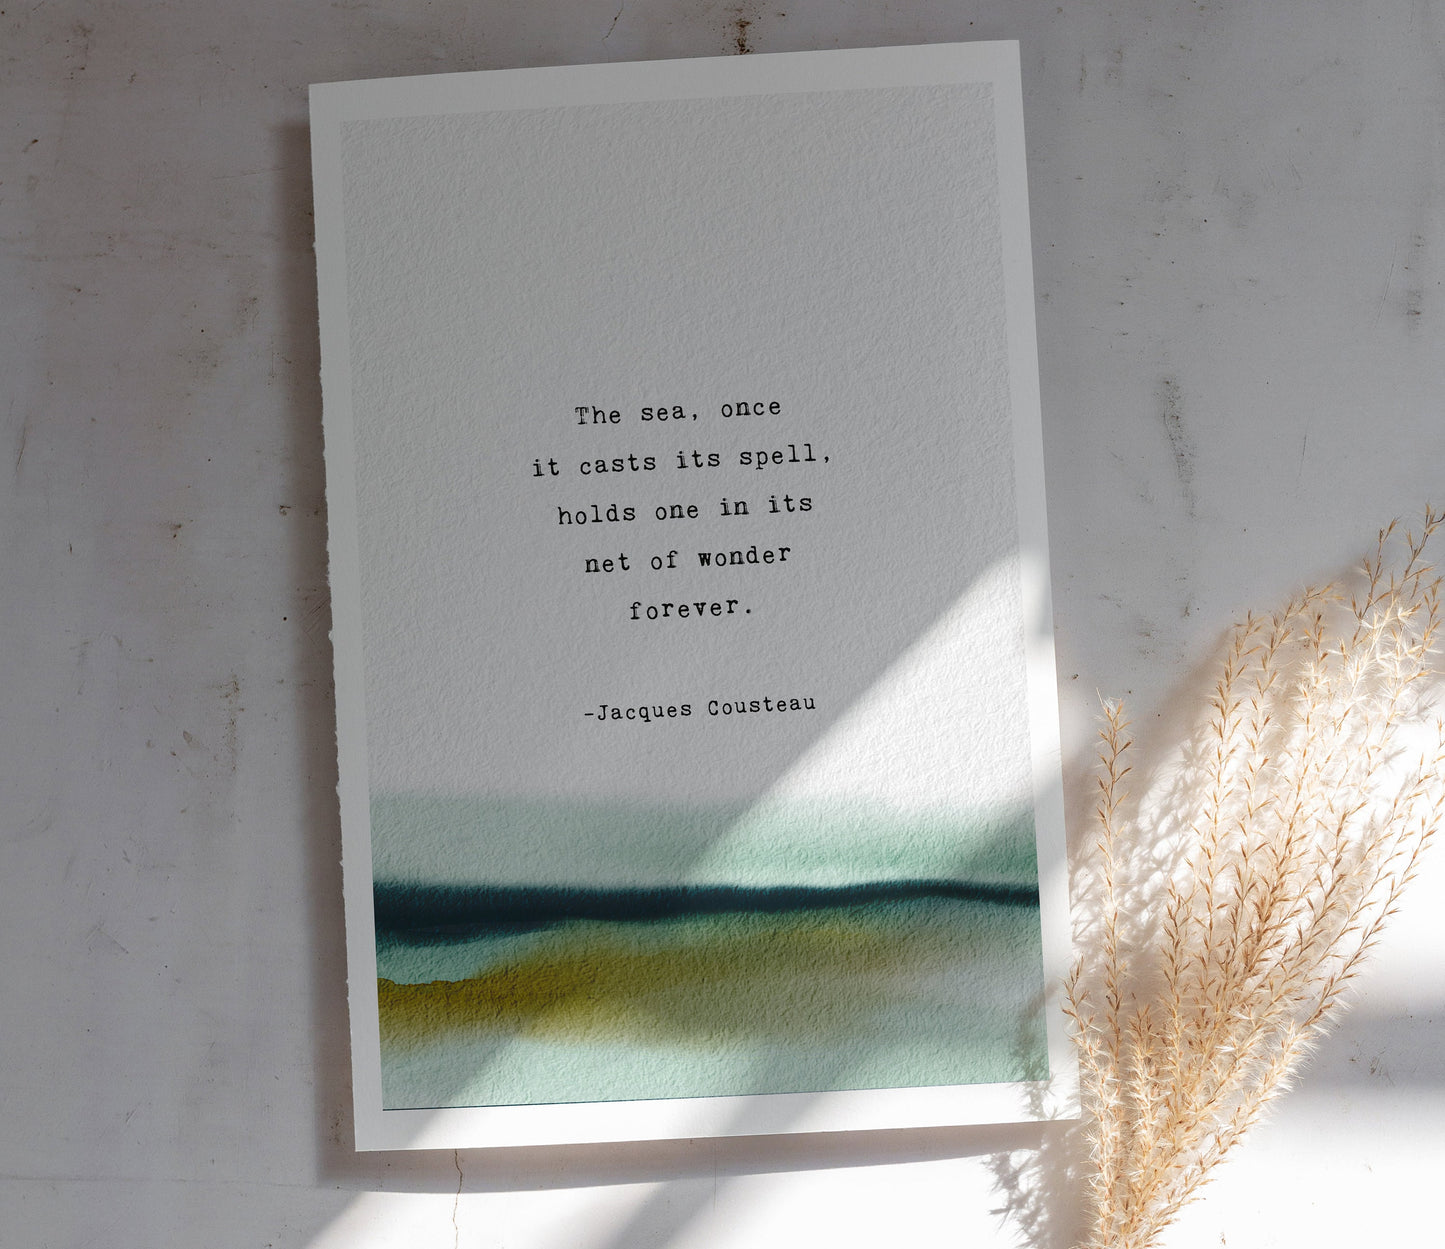 Jacques Cousteau quote print "The sea, once it casts its spell, holds one in its net of wonder forever". Watercolor art with quote.